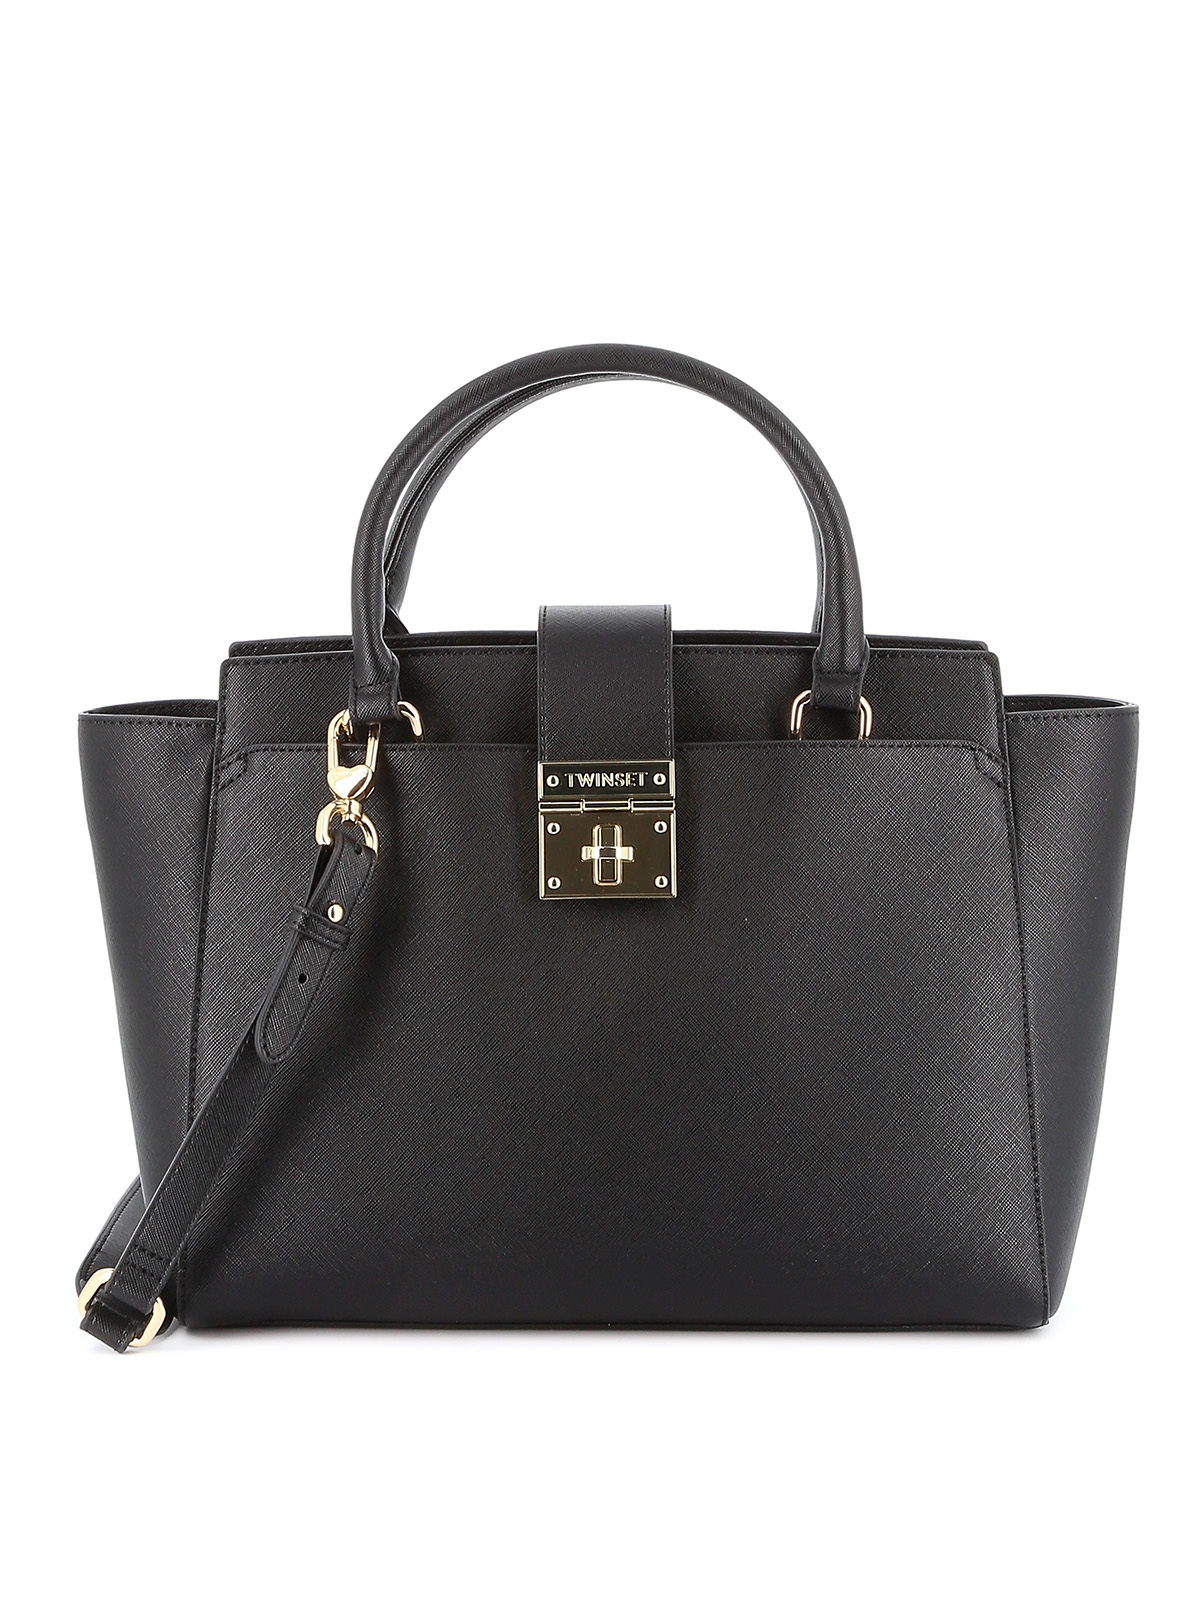 TWINSET BLACK FAUX LEATHER TOTE BAG